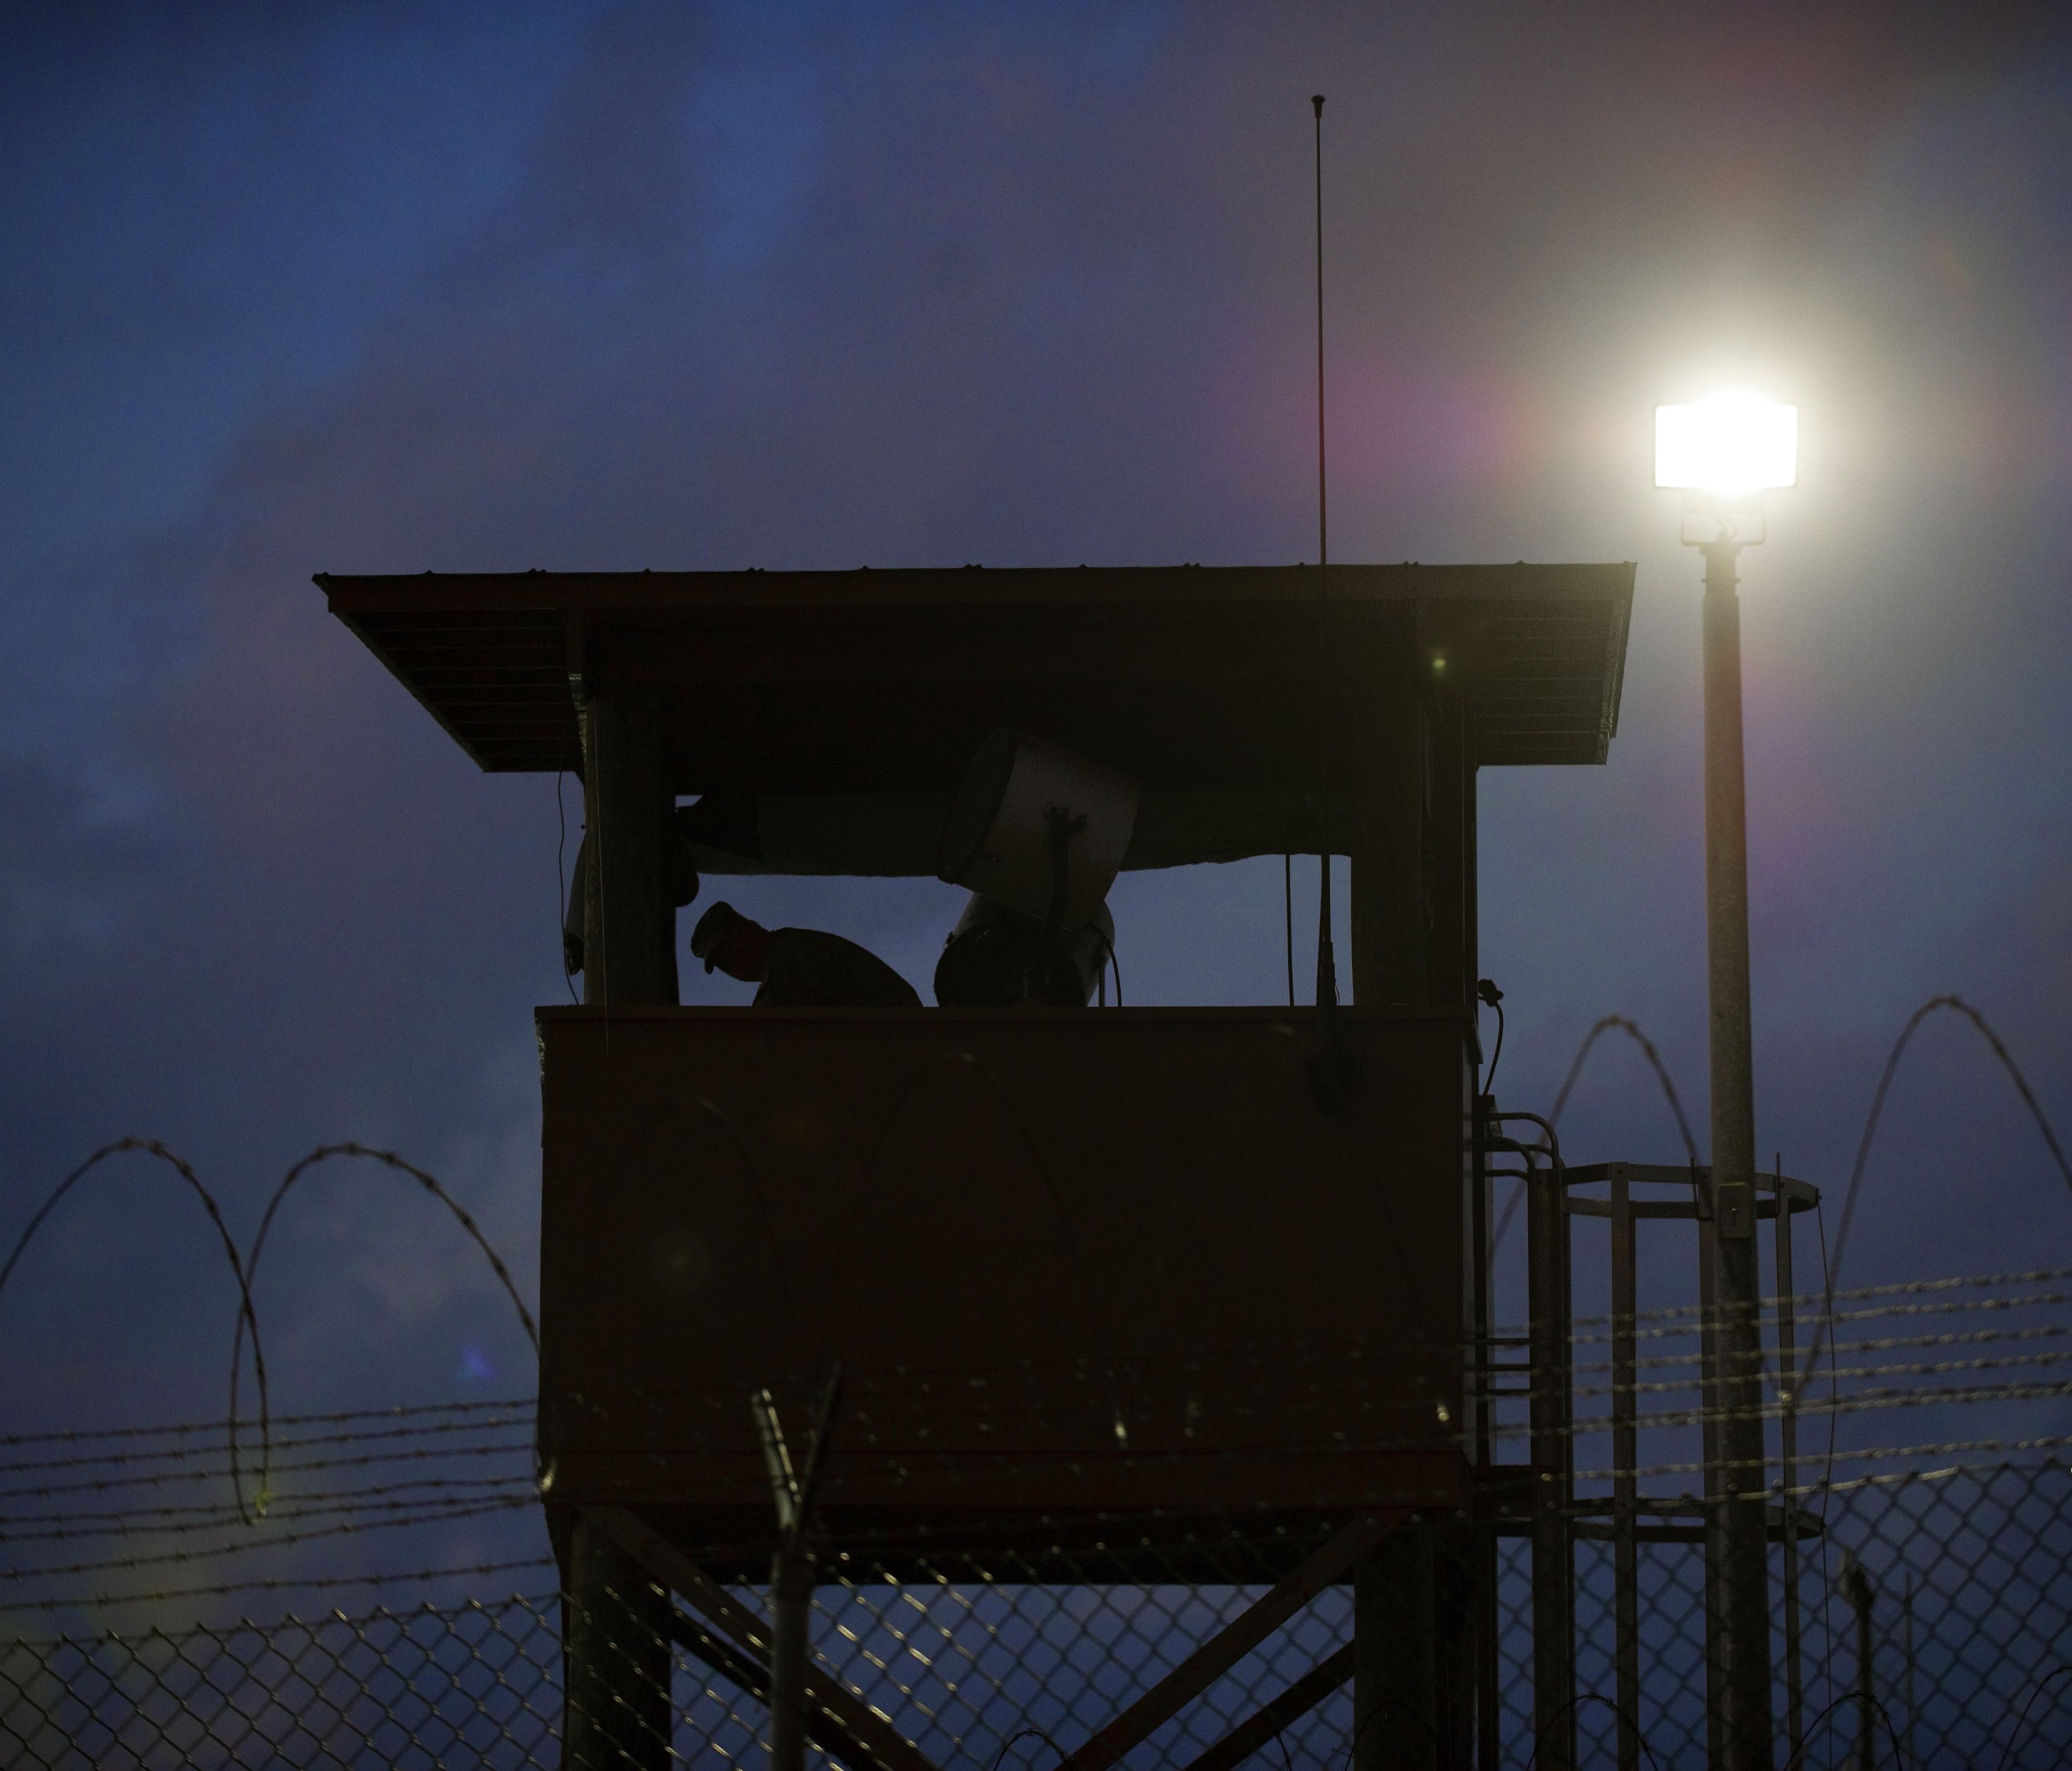 In this March 30, 2010 file photo reviewed by U.S. military officials, a member of the U.S. military mans the guard post before sunrise at Camp Delta, part of the U.S. Detention Center in Guantanamo Bay, Cuba.